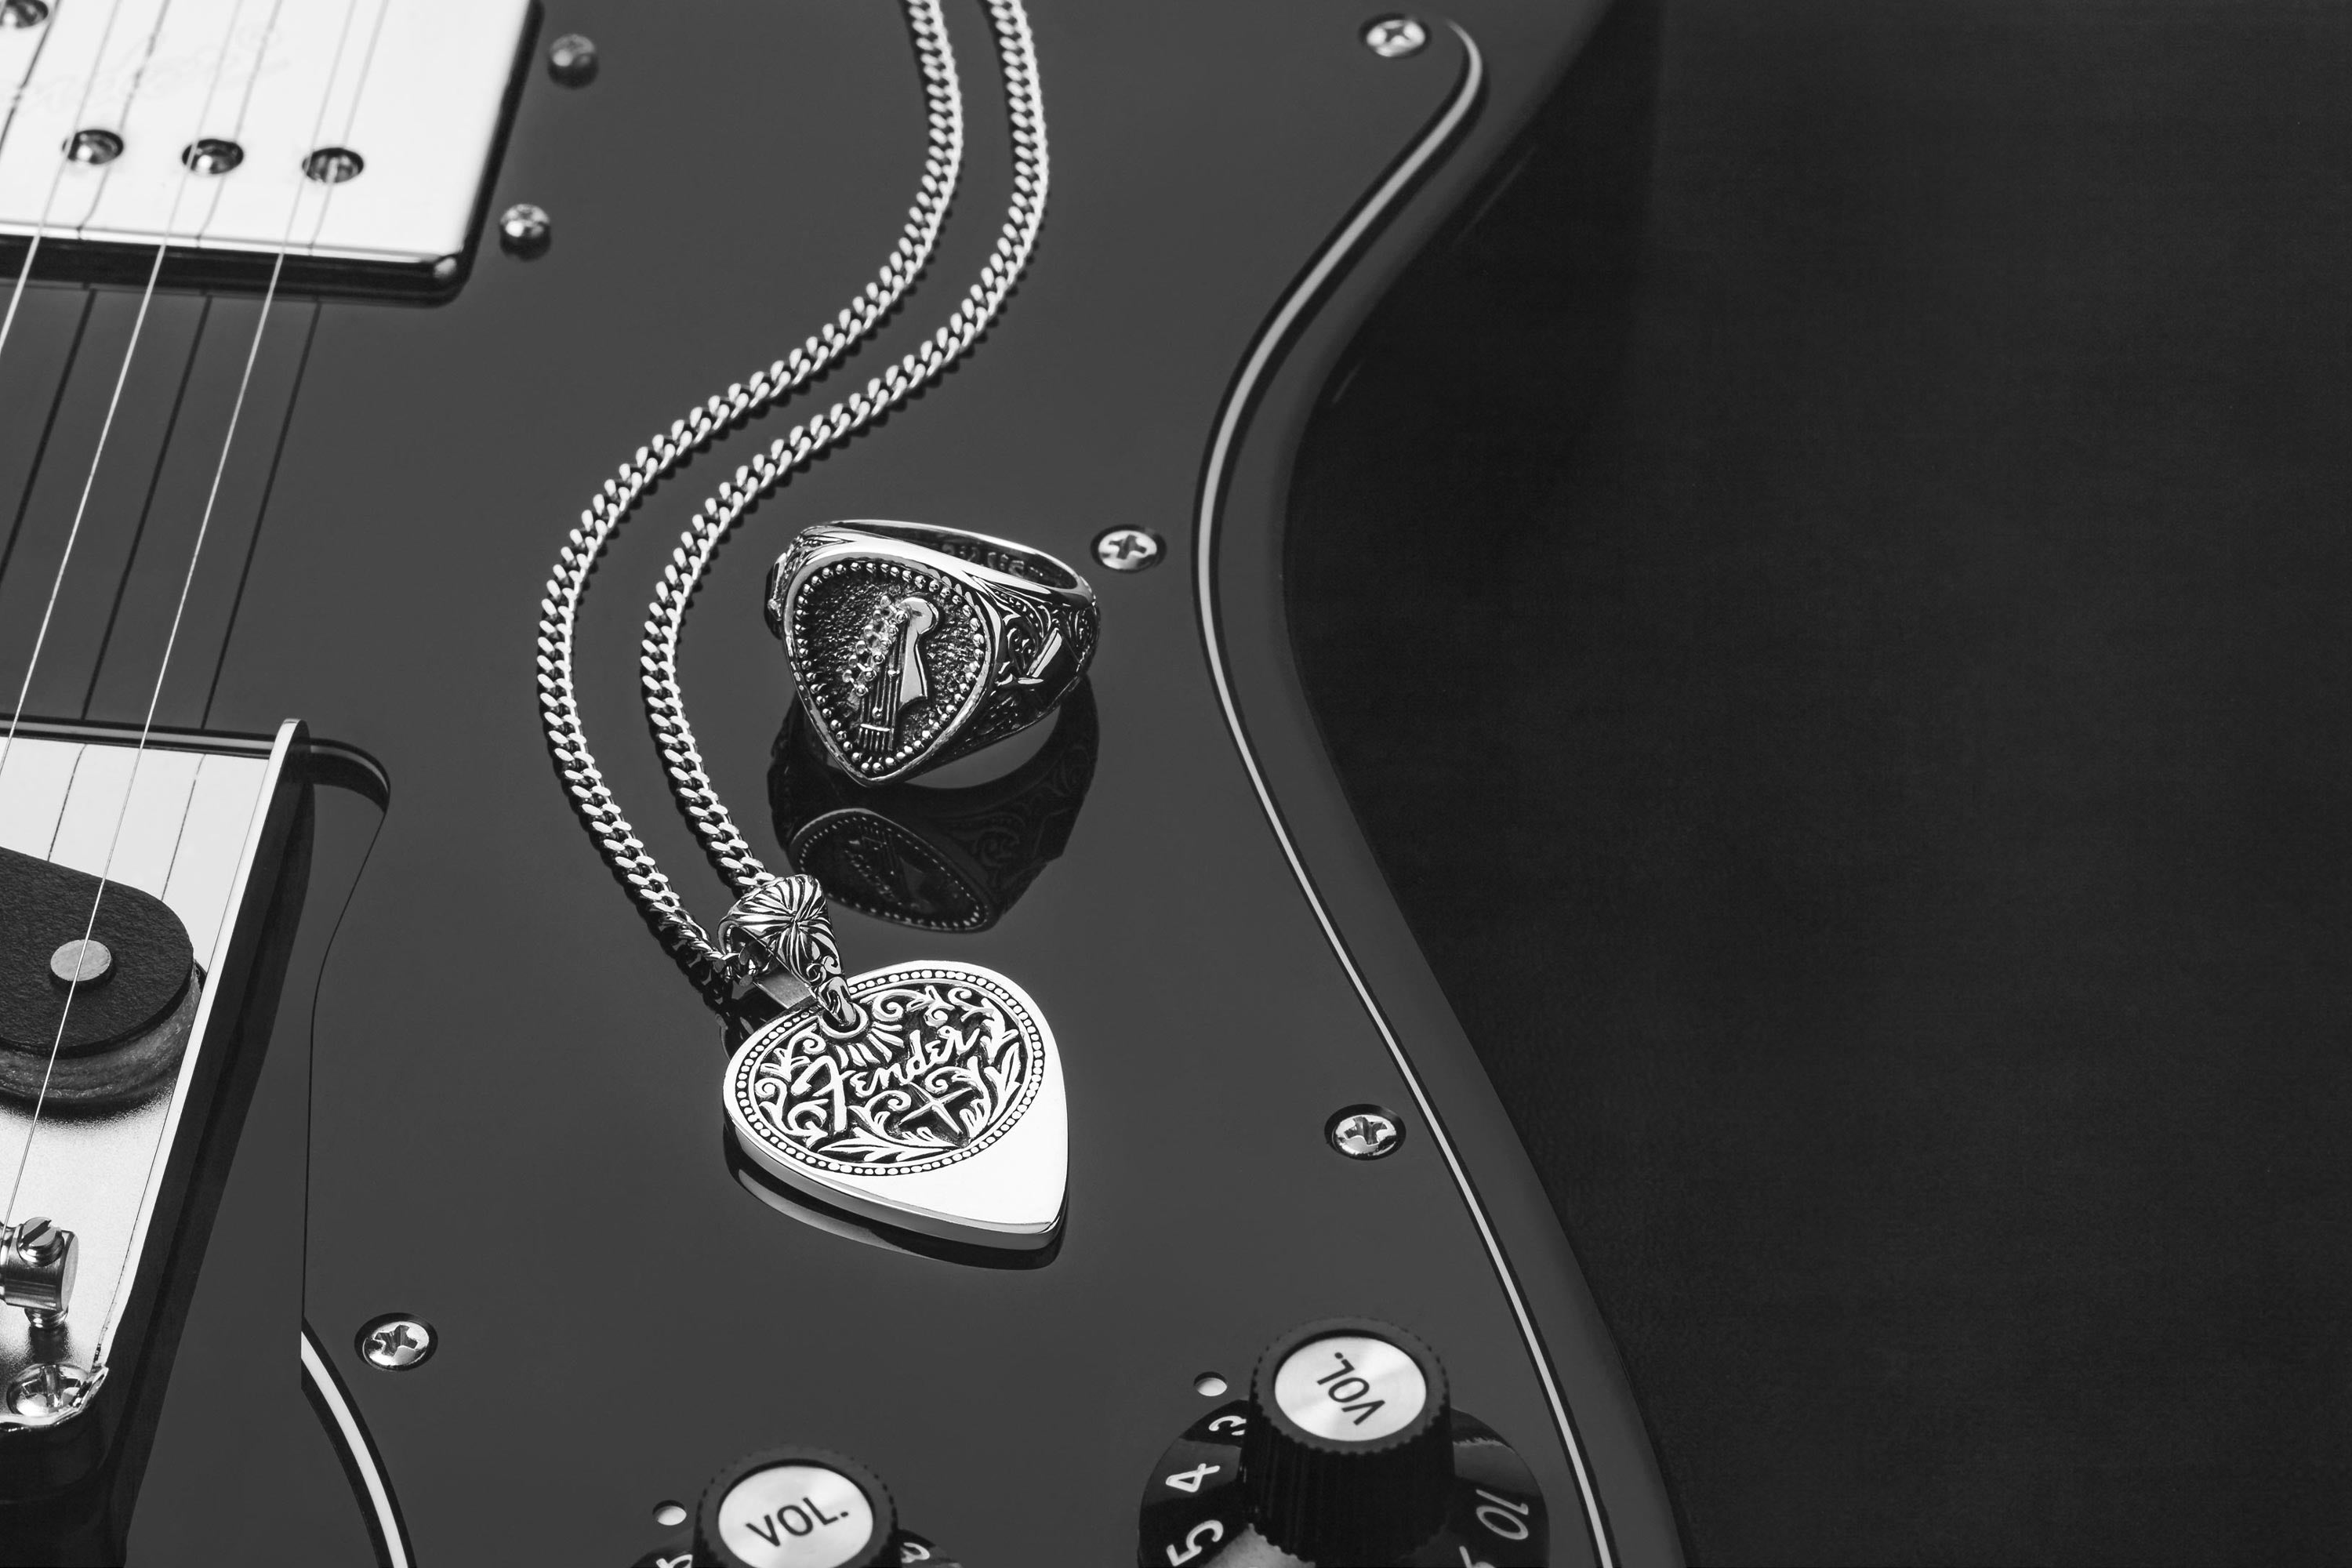 Fender Clocks and Colours Sterling Silver Ring Sterling Silver Pendant Collaboration Limited Edition on Fender Guitar